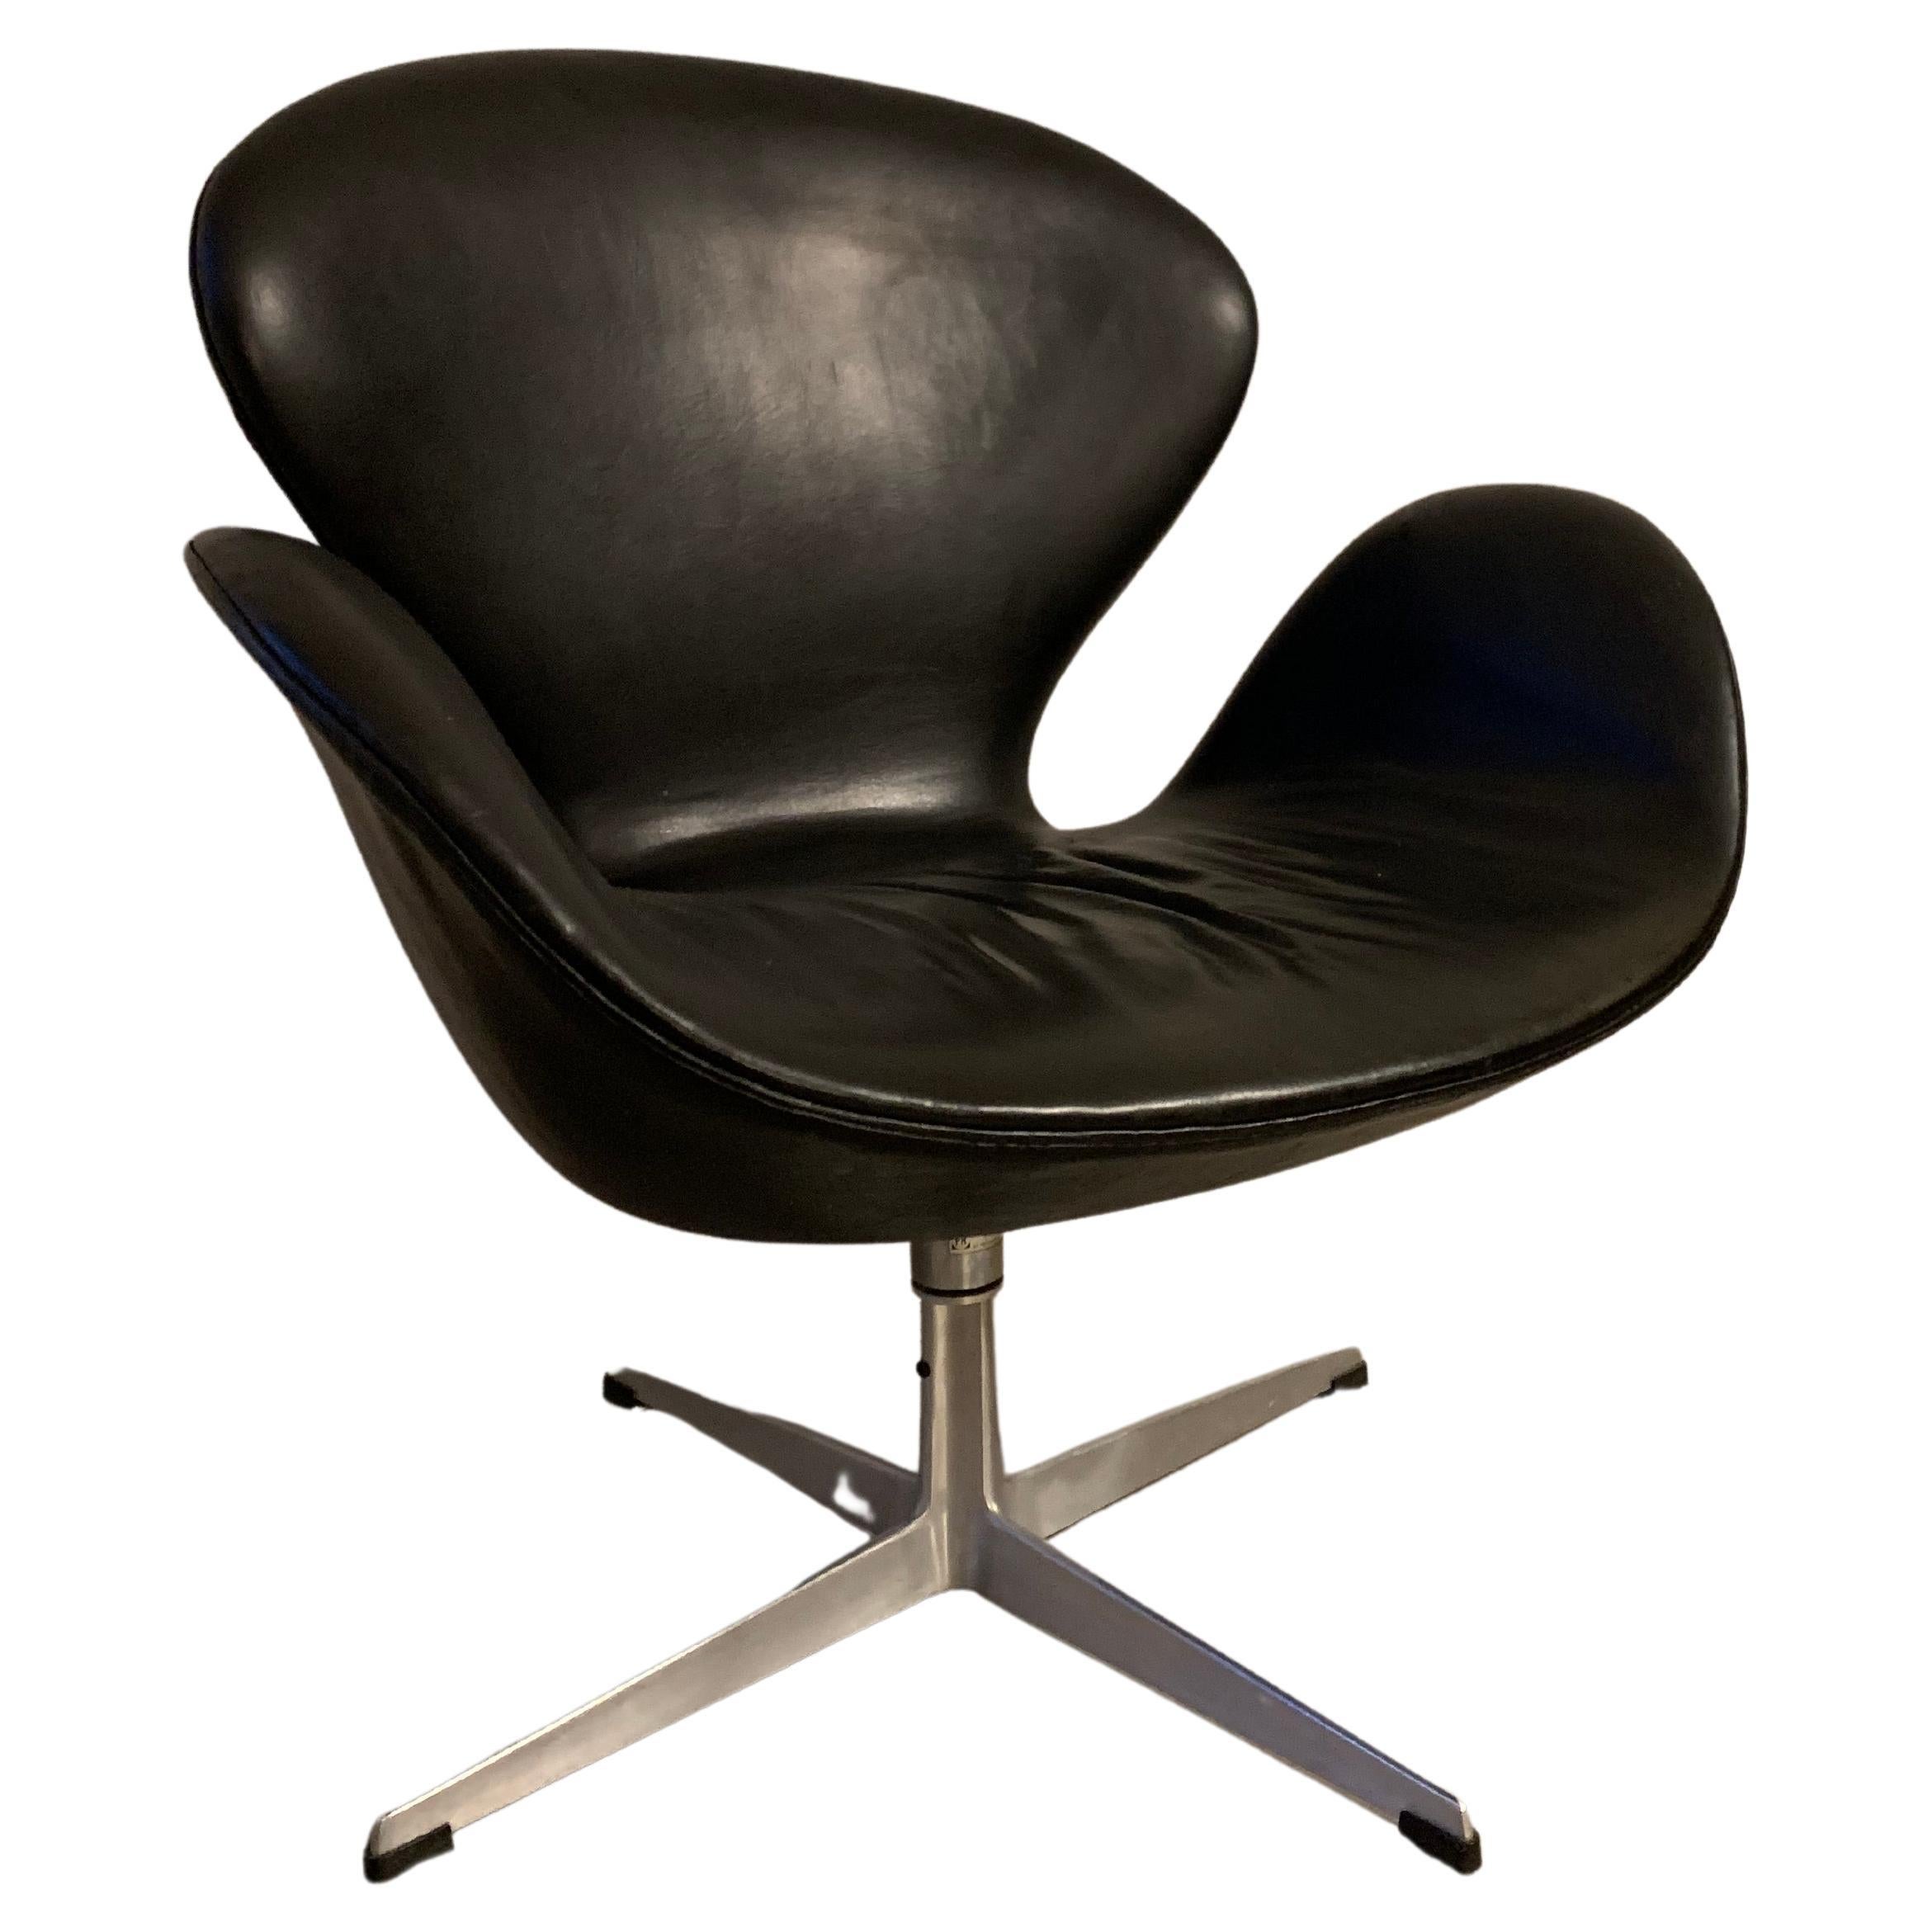 Arne Jacobsen "Svanen" from 1964 with Black Leather